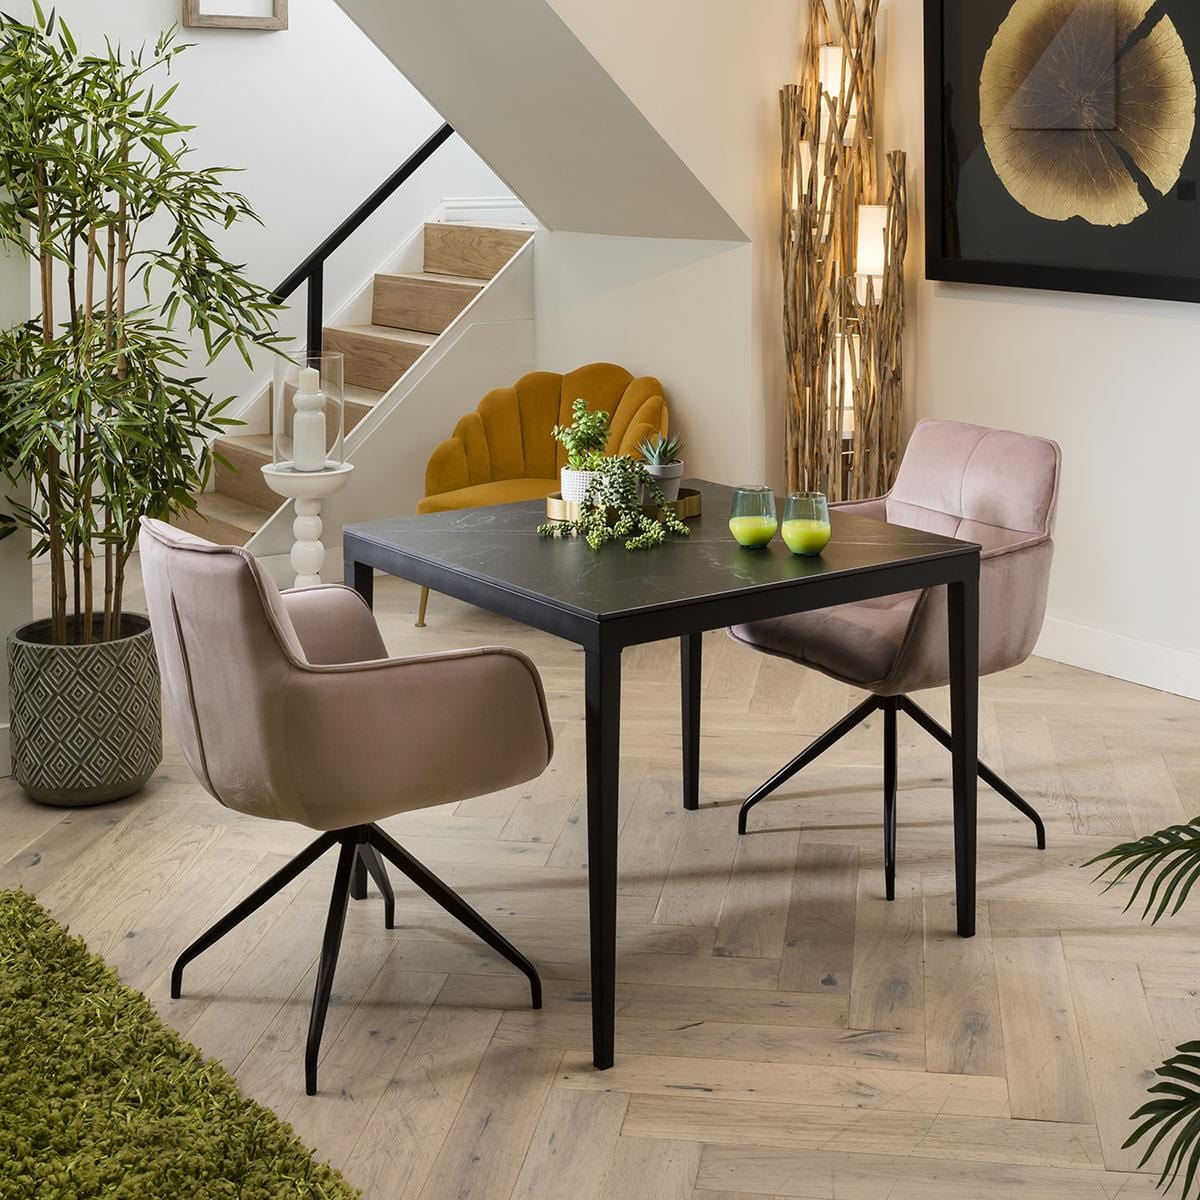 Quatropi Quatropi Modern Small Dining Table And 2 Pink Chairs - Black Ceramic Marble Table